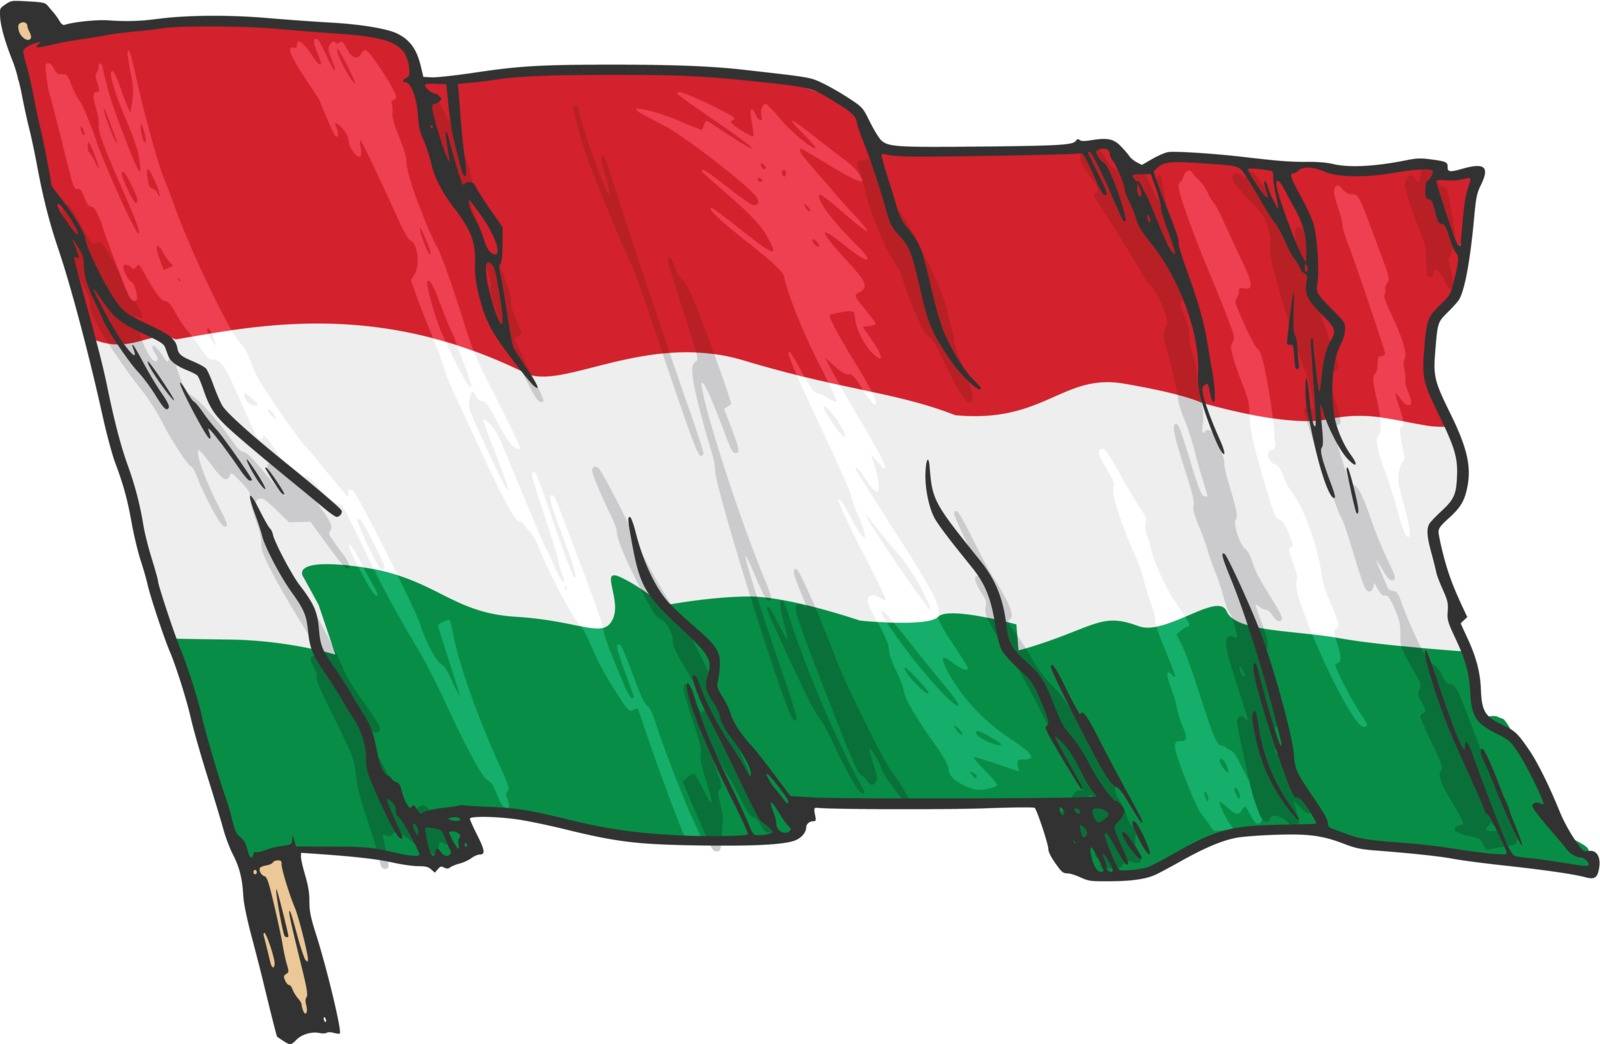 hand drawn, sketch, illustration of flag of Hungary